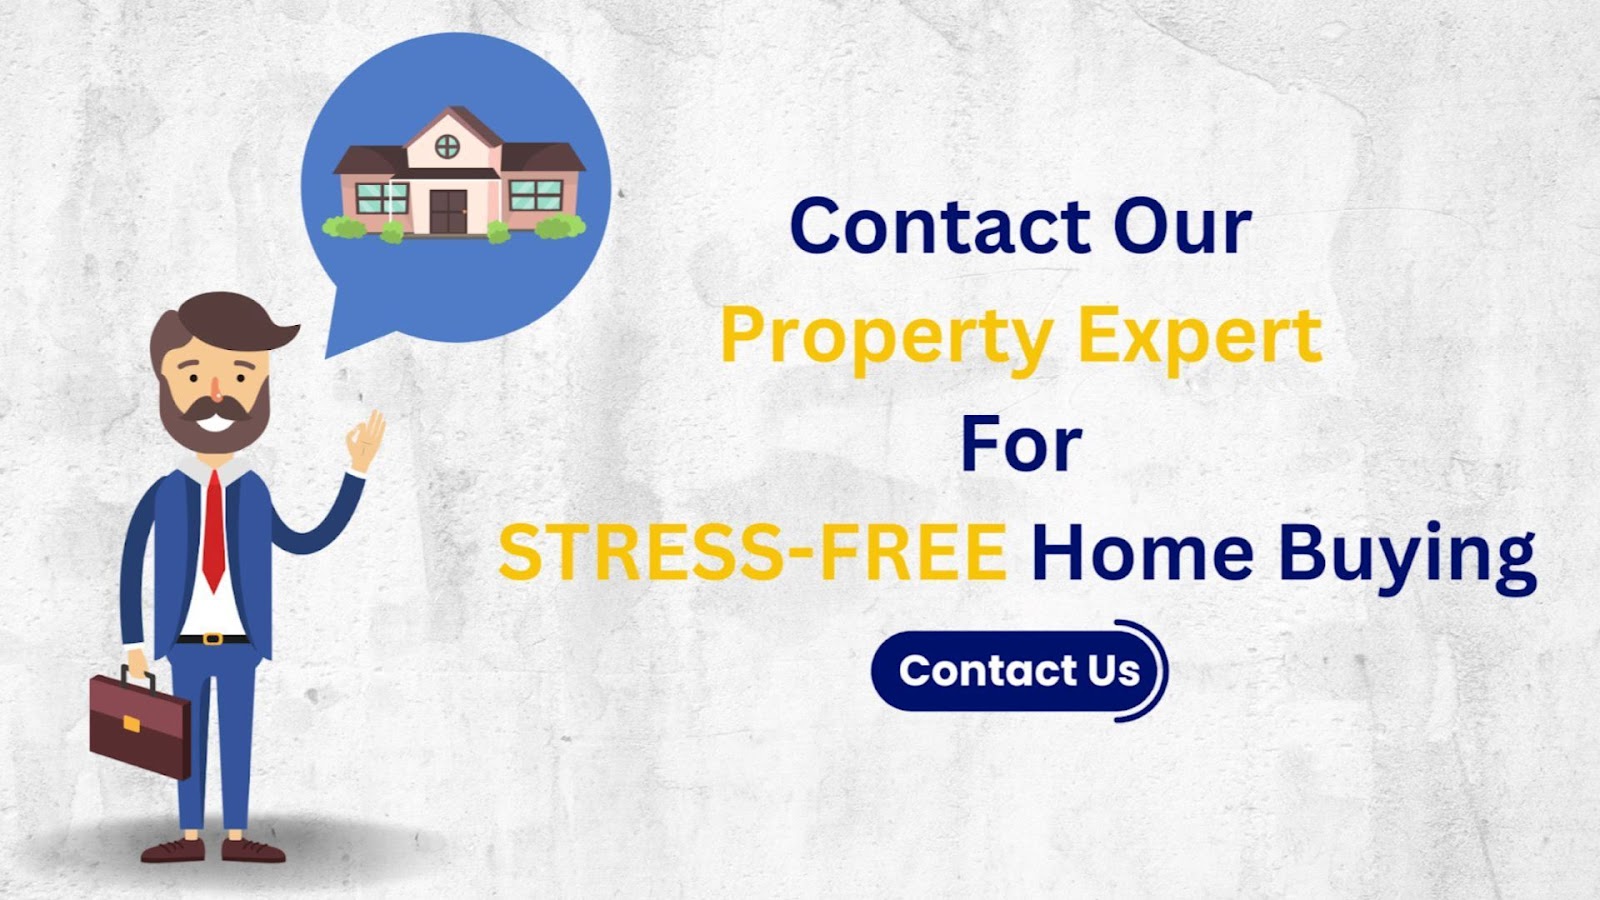 Contact the property expert at PropertyCloud to get guidance related to buying and selling property an an NRI.